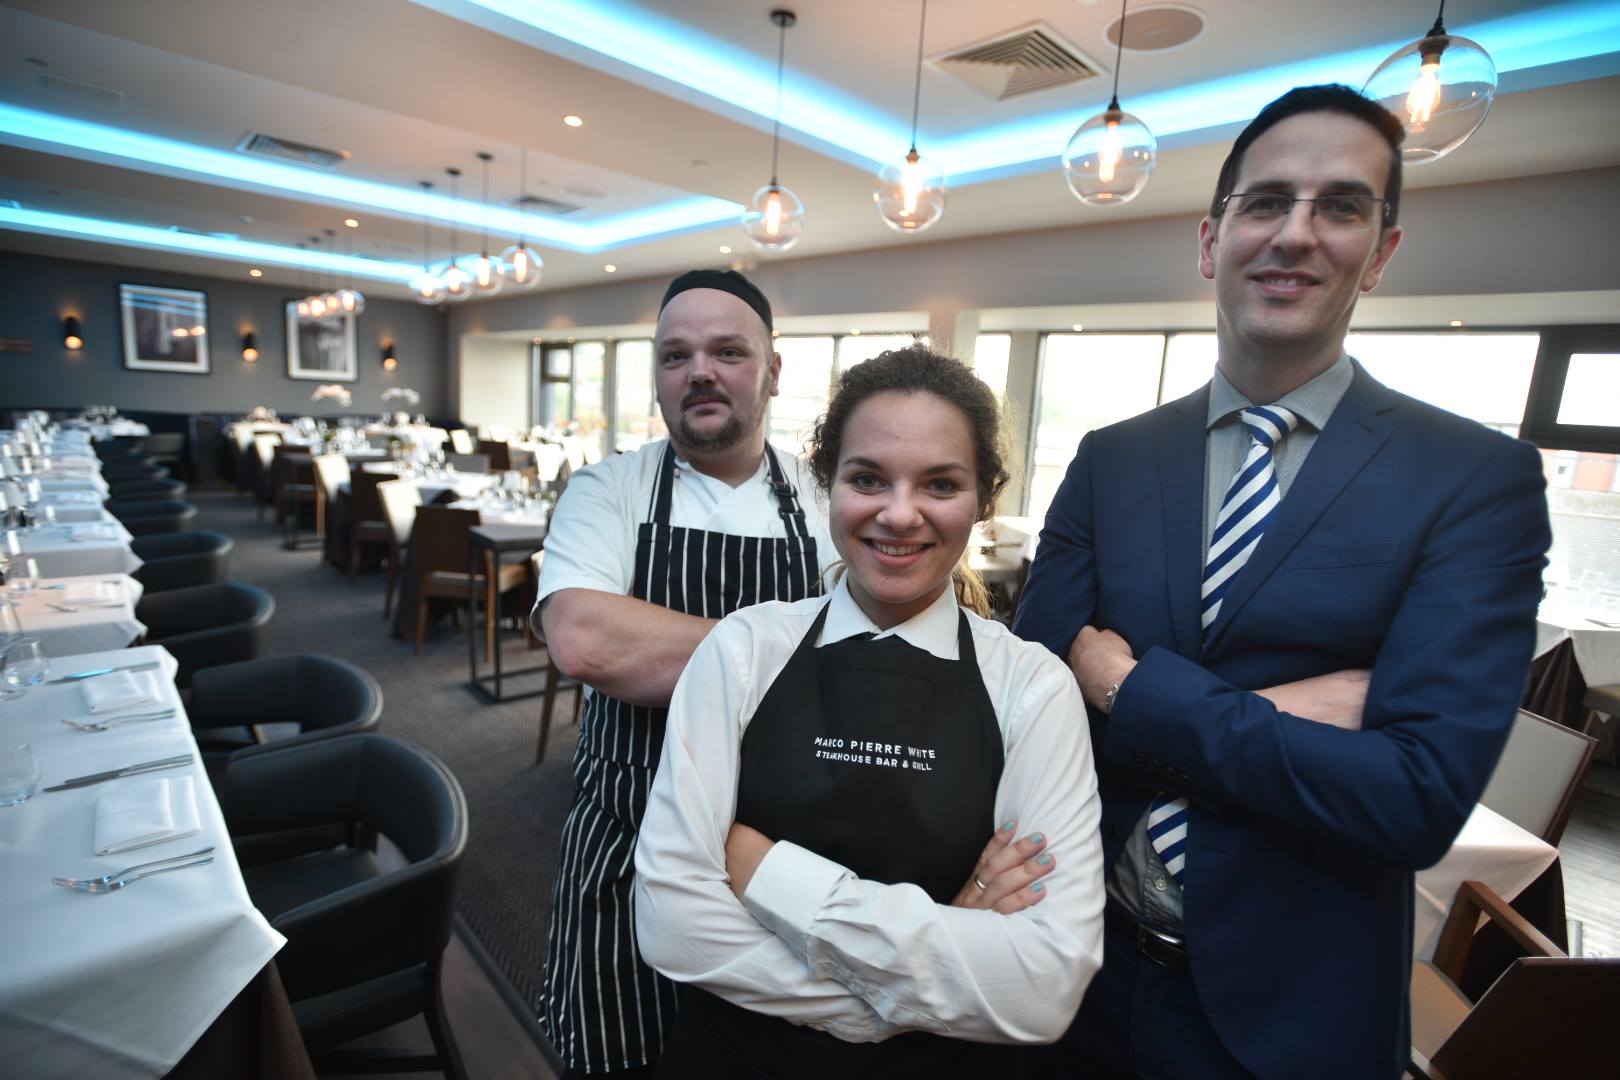 The team at DoubleTree by Hilton for the new Marco Pierre White Steakhouse. Photo Steve Smailes for The Lincolnite